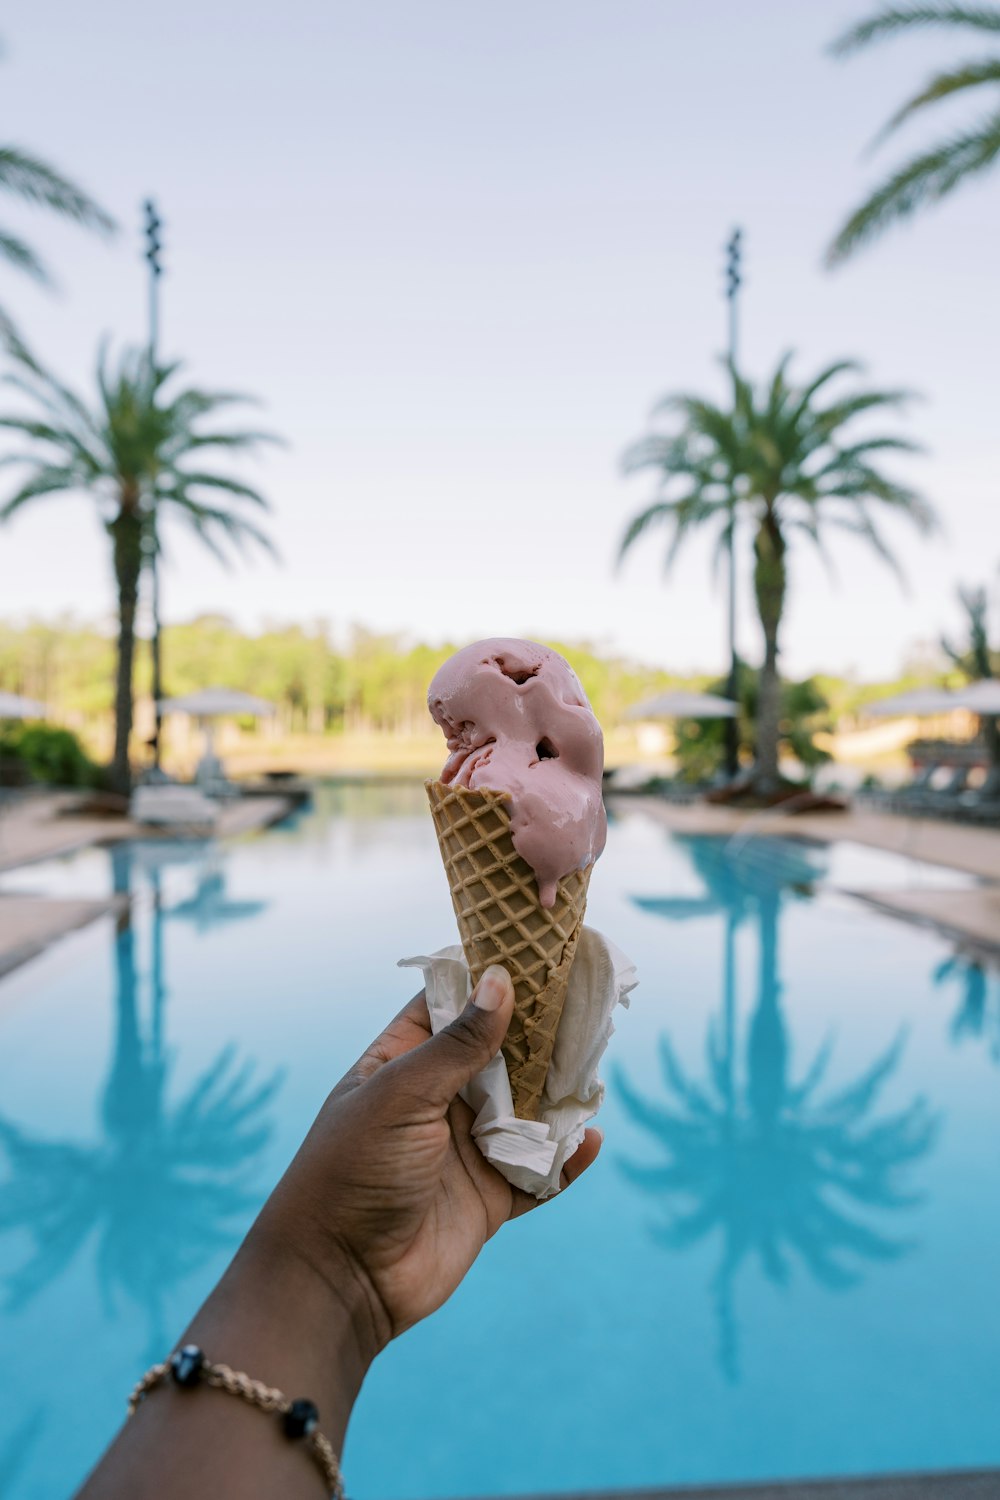 a person holding a pink ice cream cone in front of a swimming pool